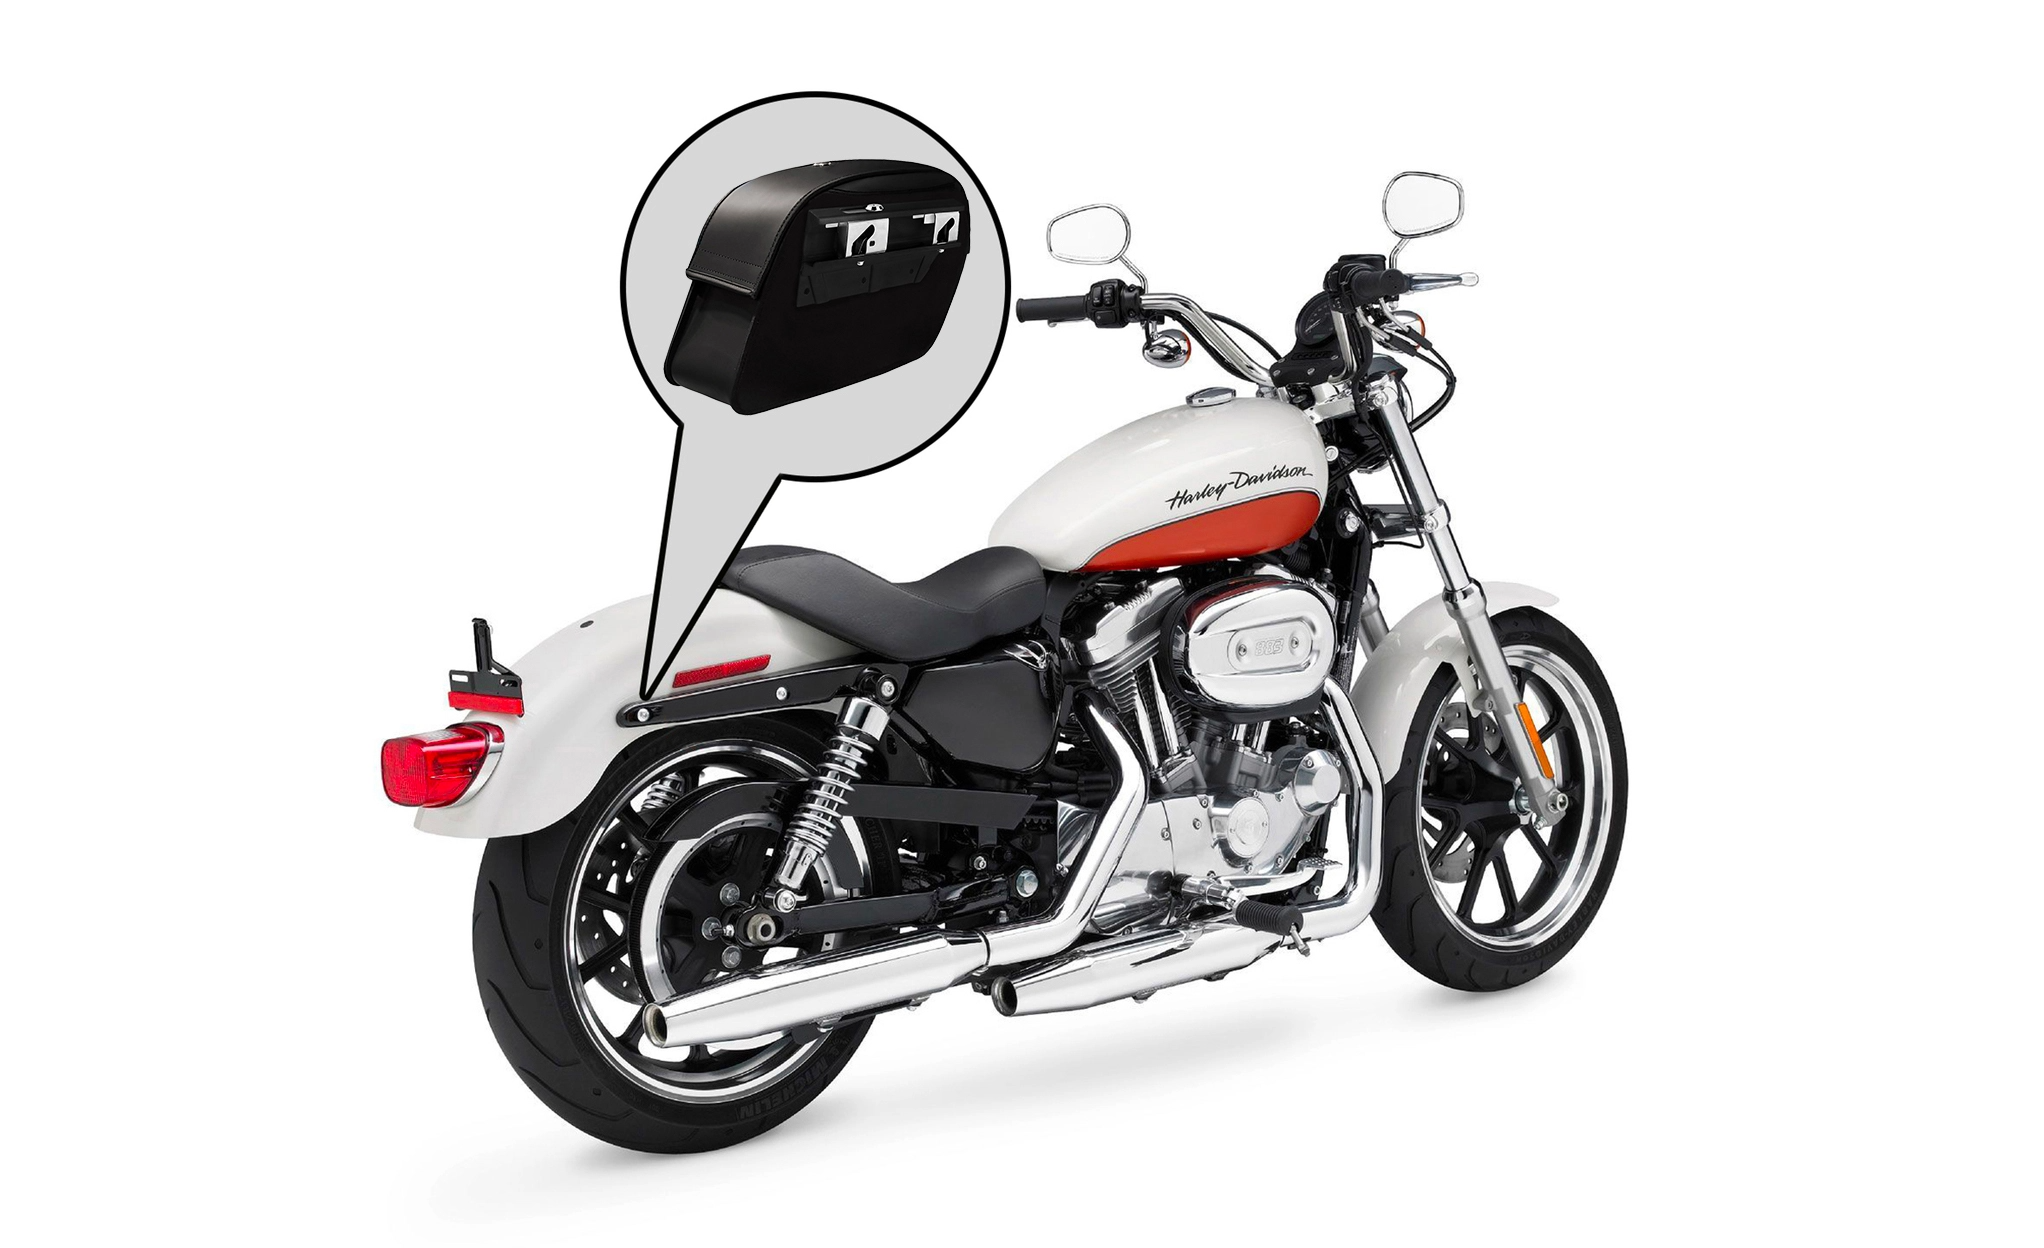 Viking Saddlebags Quick Disconnect System For Suzuki Boulevard Bag on Bike View @expand